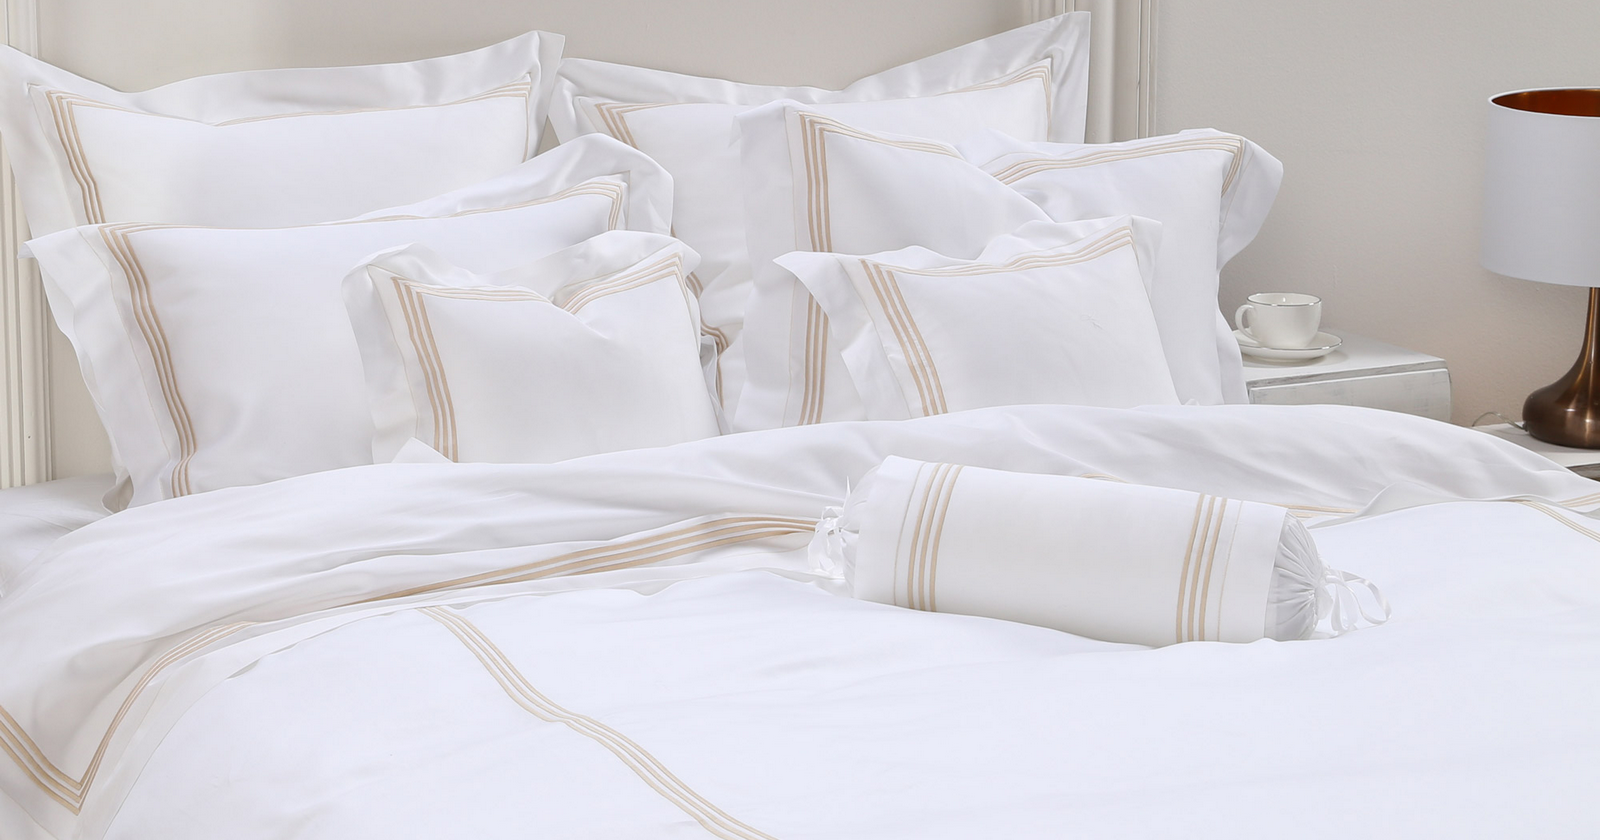 Expensive Bedding: Is it Really Worth It?